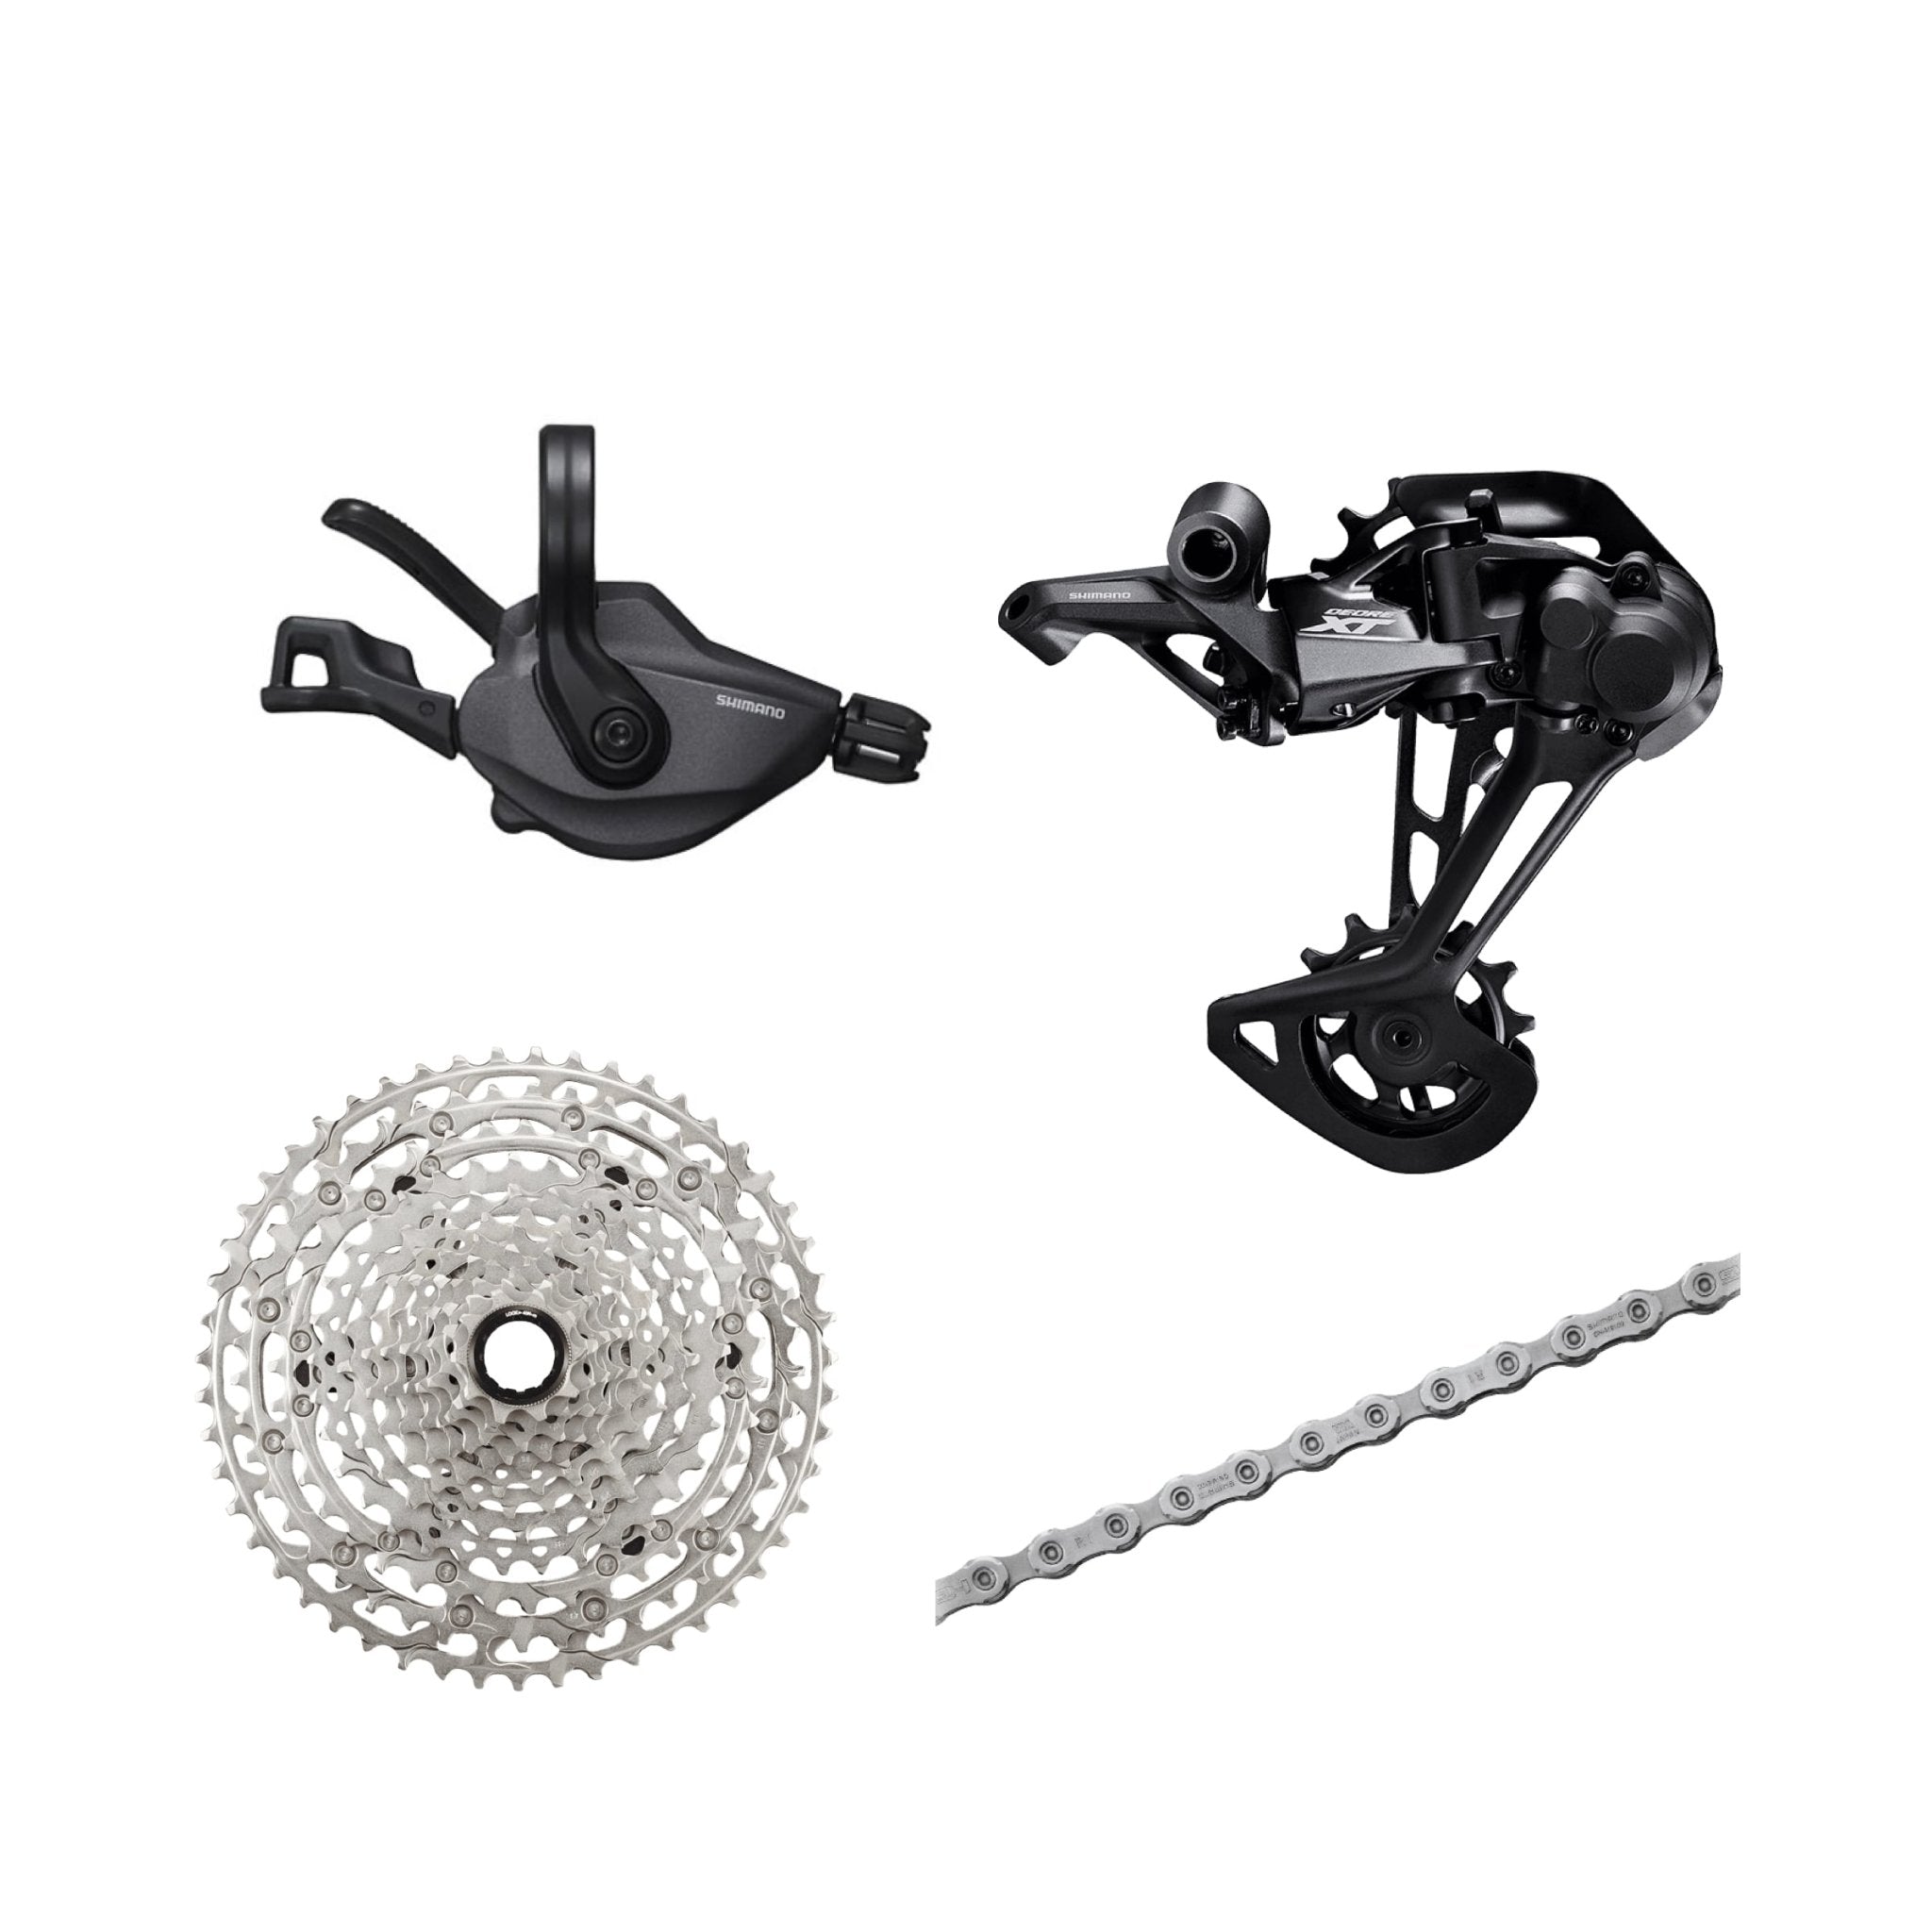 Shimano Deore XT M8100 / Deore 12s M6100 Groupset, 1x12, w/o crankset -  M8100 and M6100 10-51T